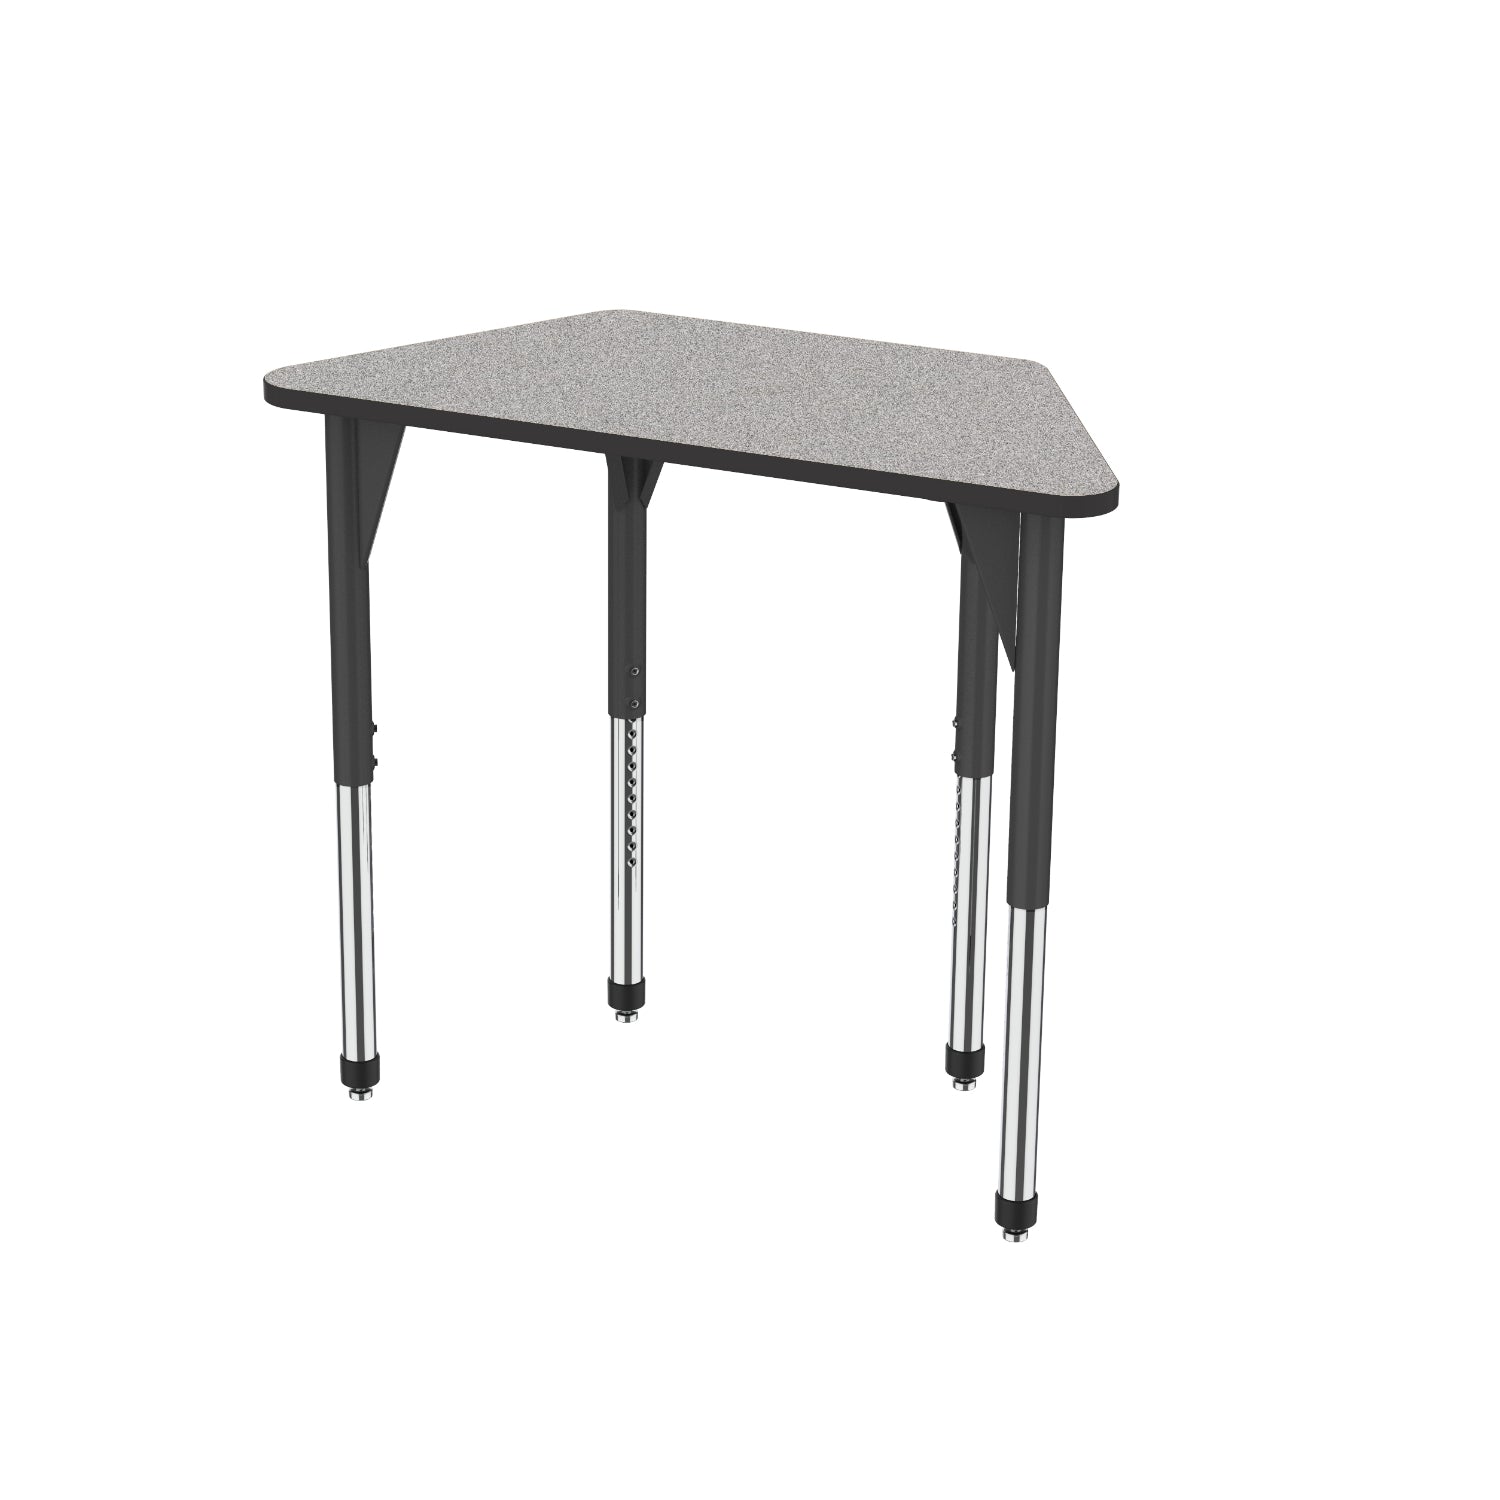 Premier Standing Height Collaborative Classroom Table, 24" x 48" Trapezoid